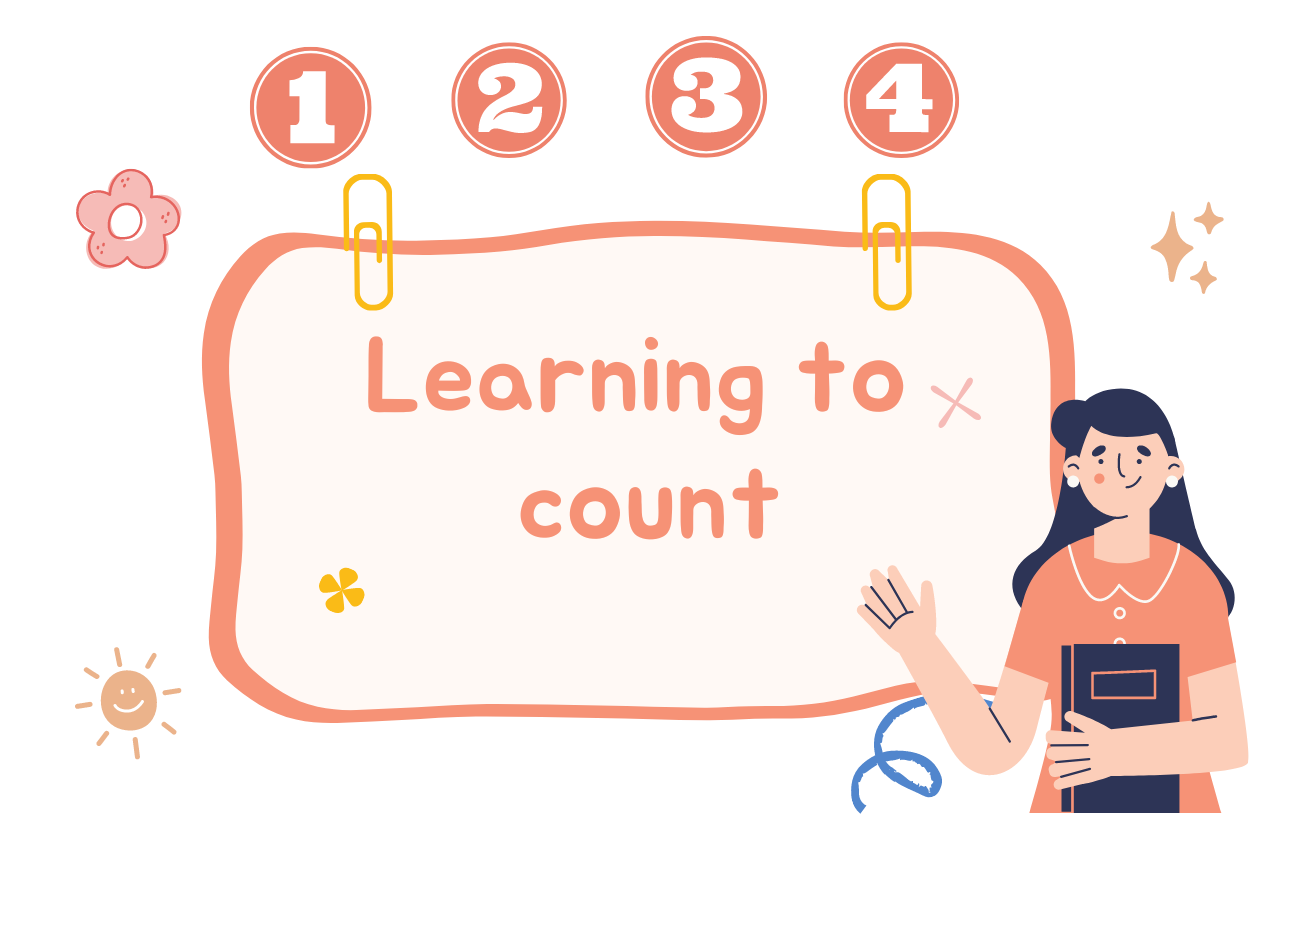 Learning to count in English. Learn ordinal numbers and cardinal numbers in English.